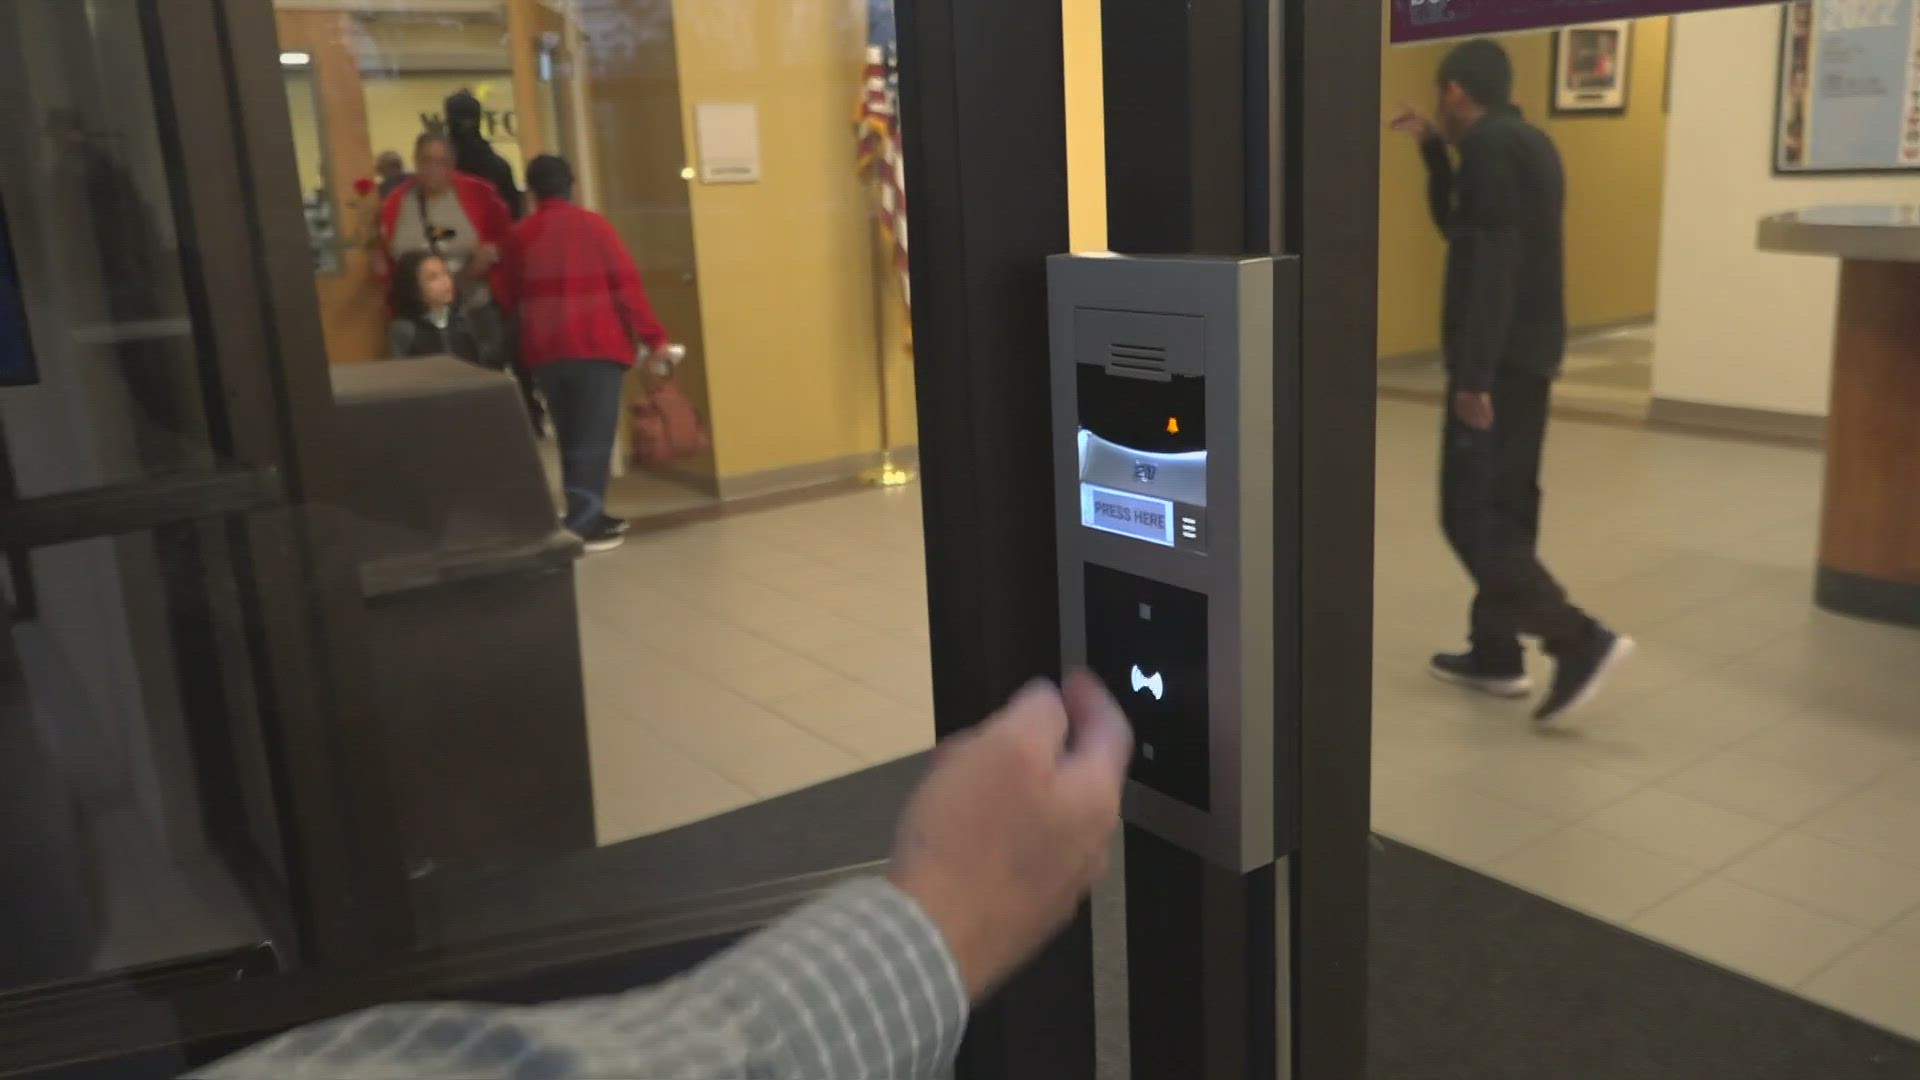 The district will add access control devices to 28 elementary schools that have separate buildings or modular units.